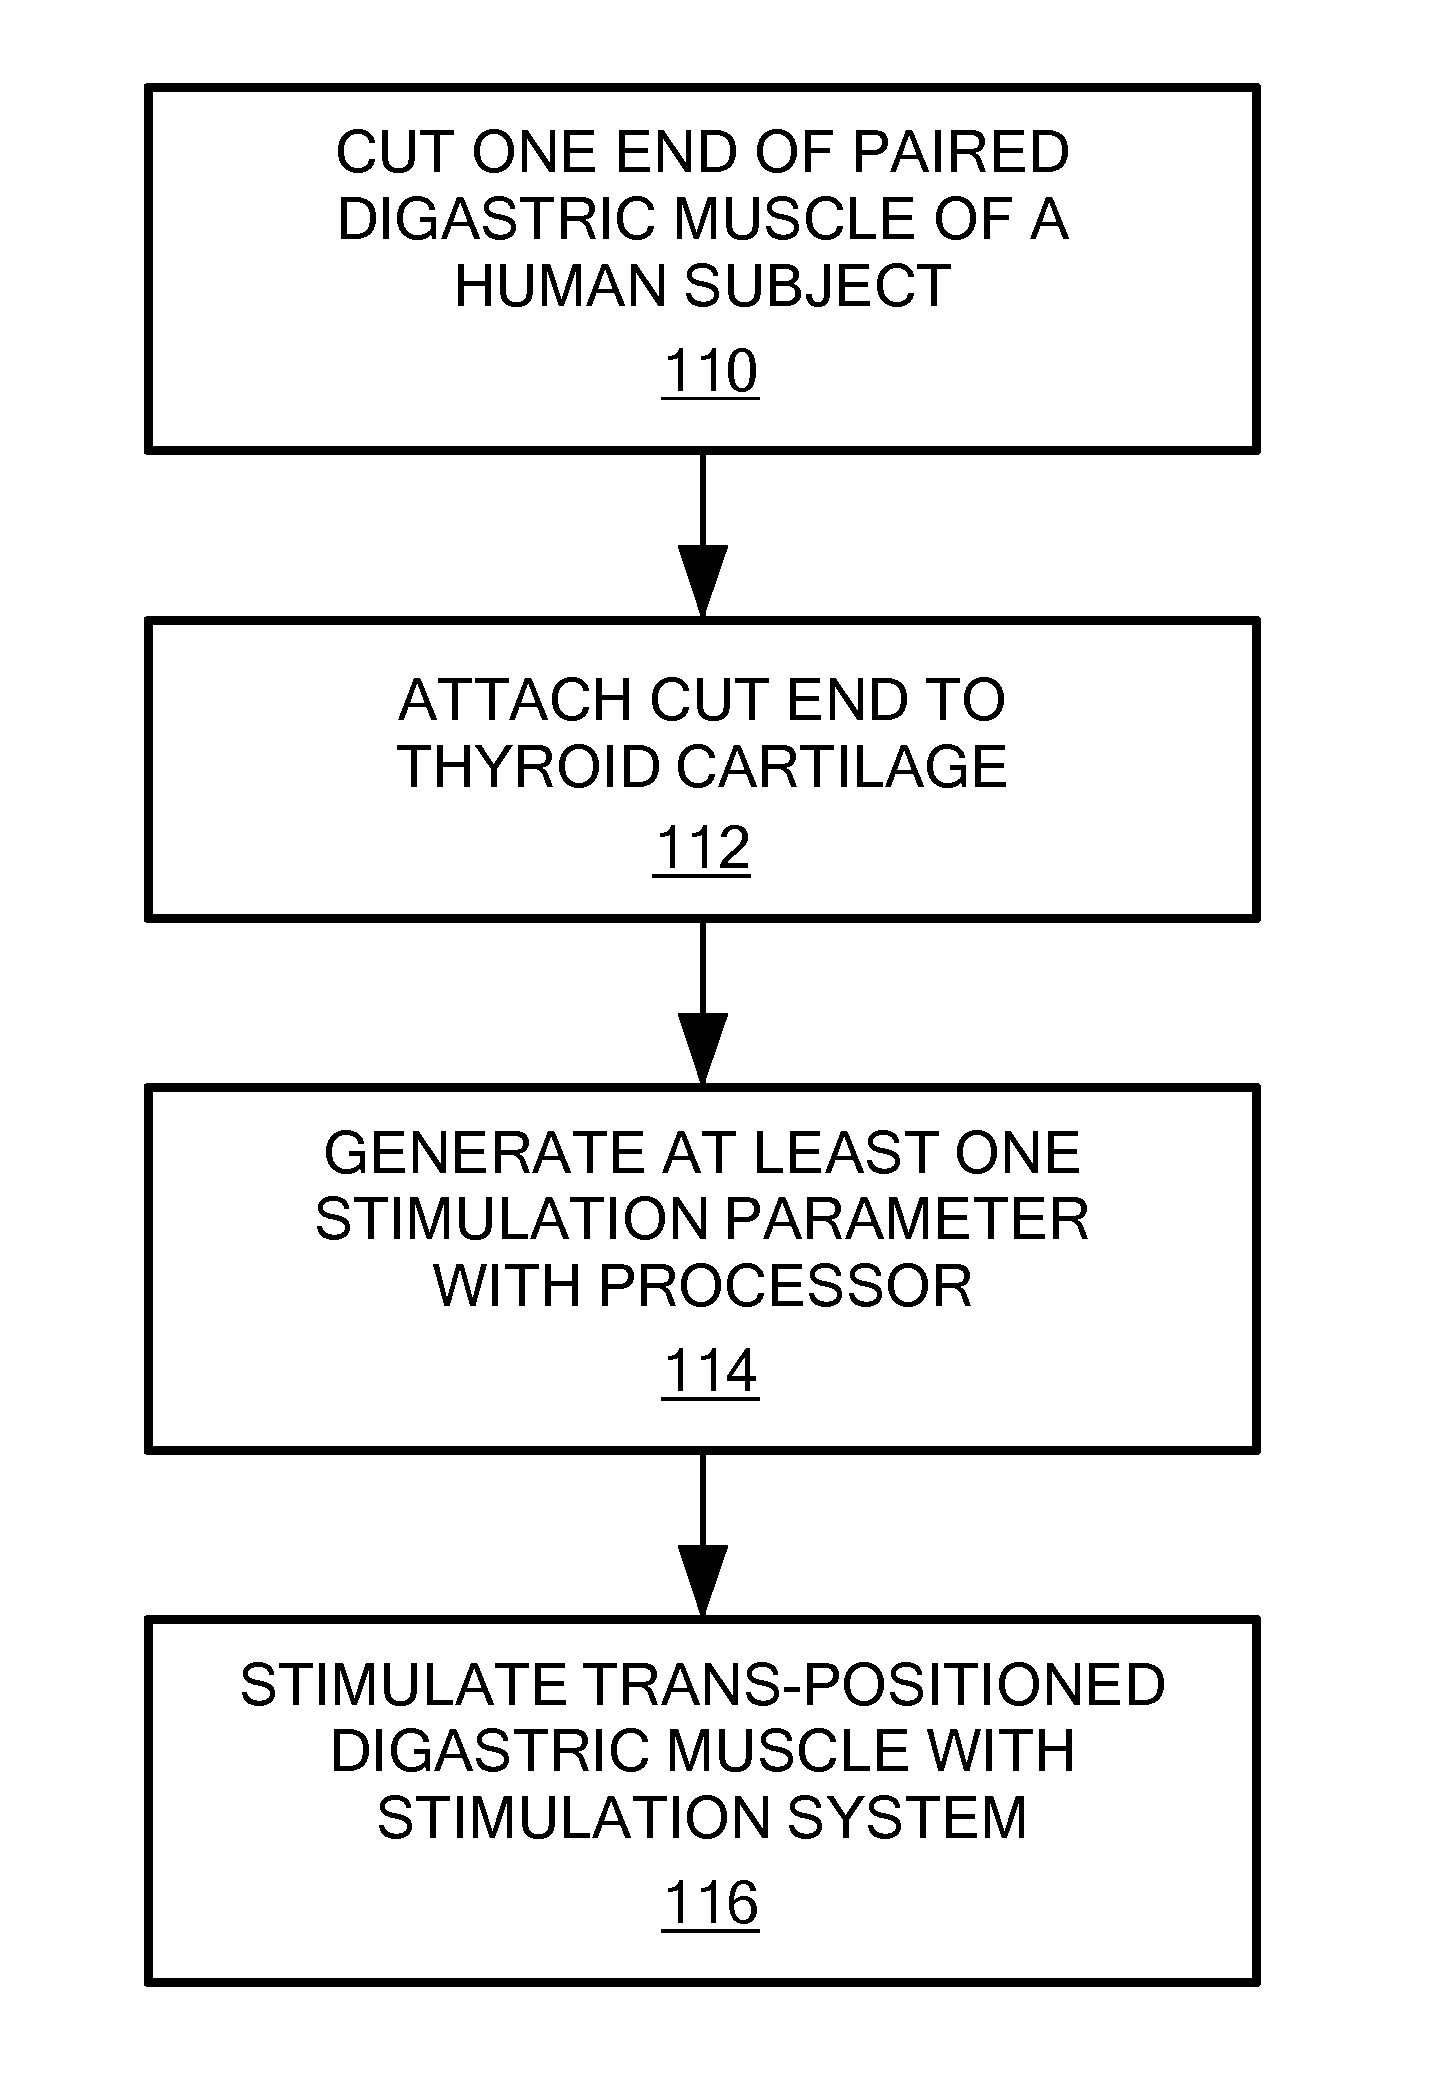 Method for Modifying Larynx Position by Trans-Positioning Muscle and Electrode Stimulation